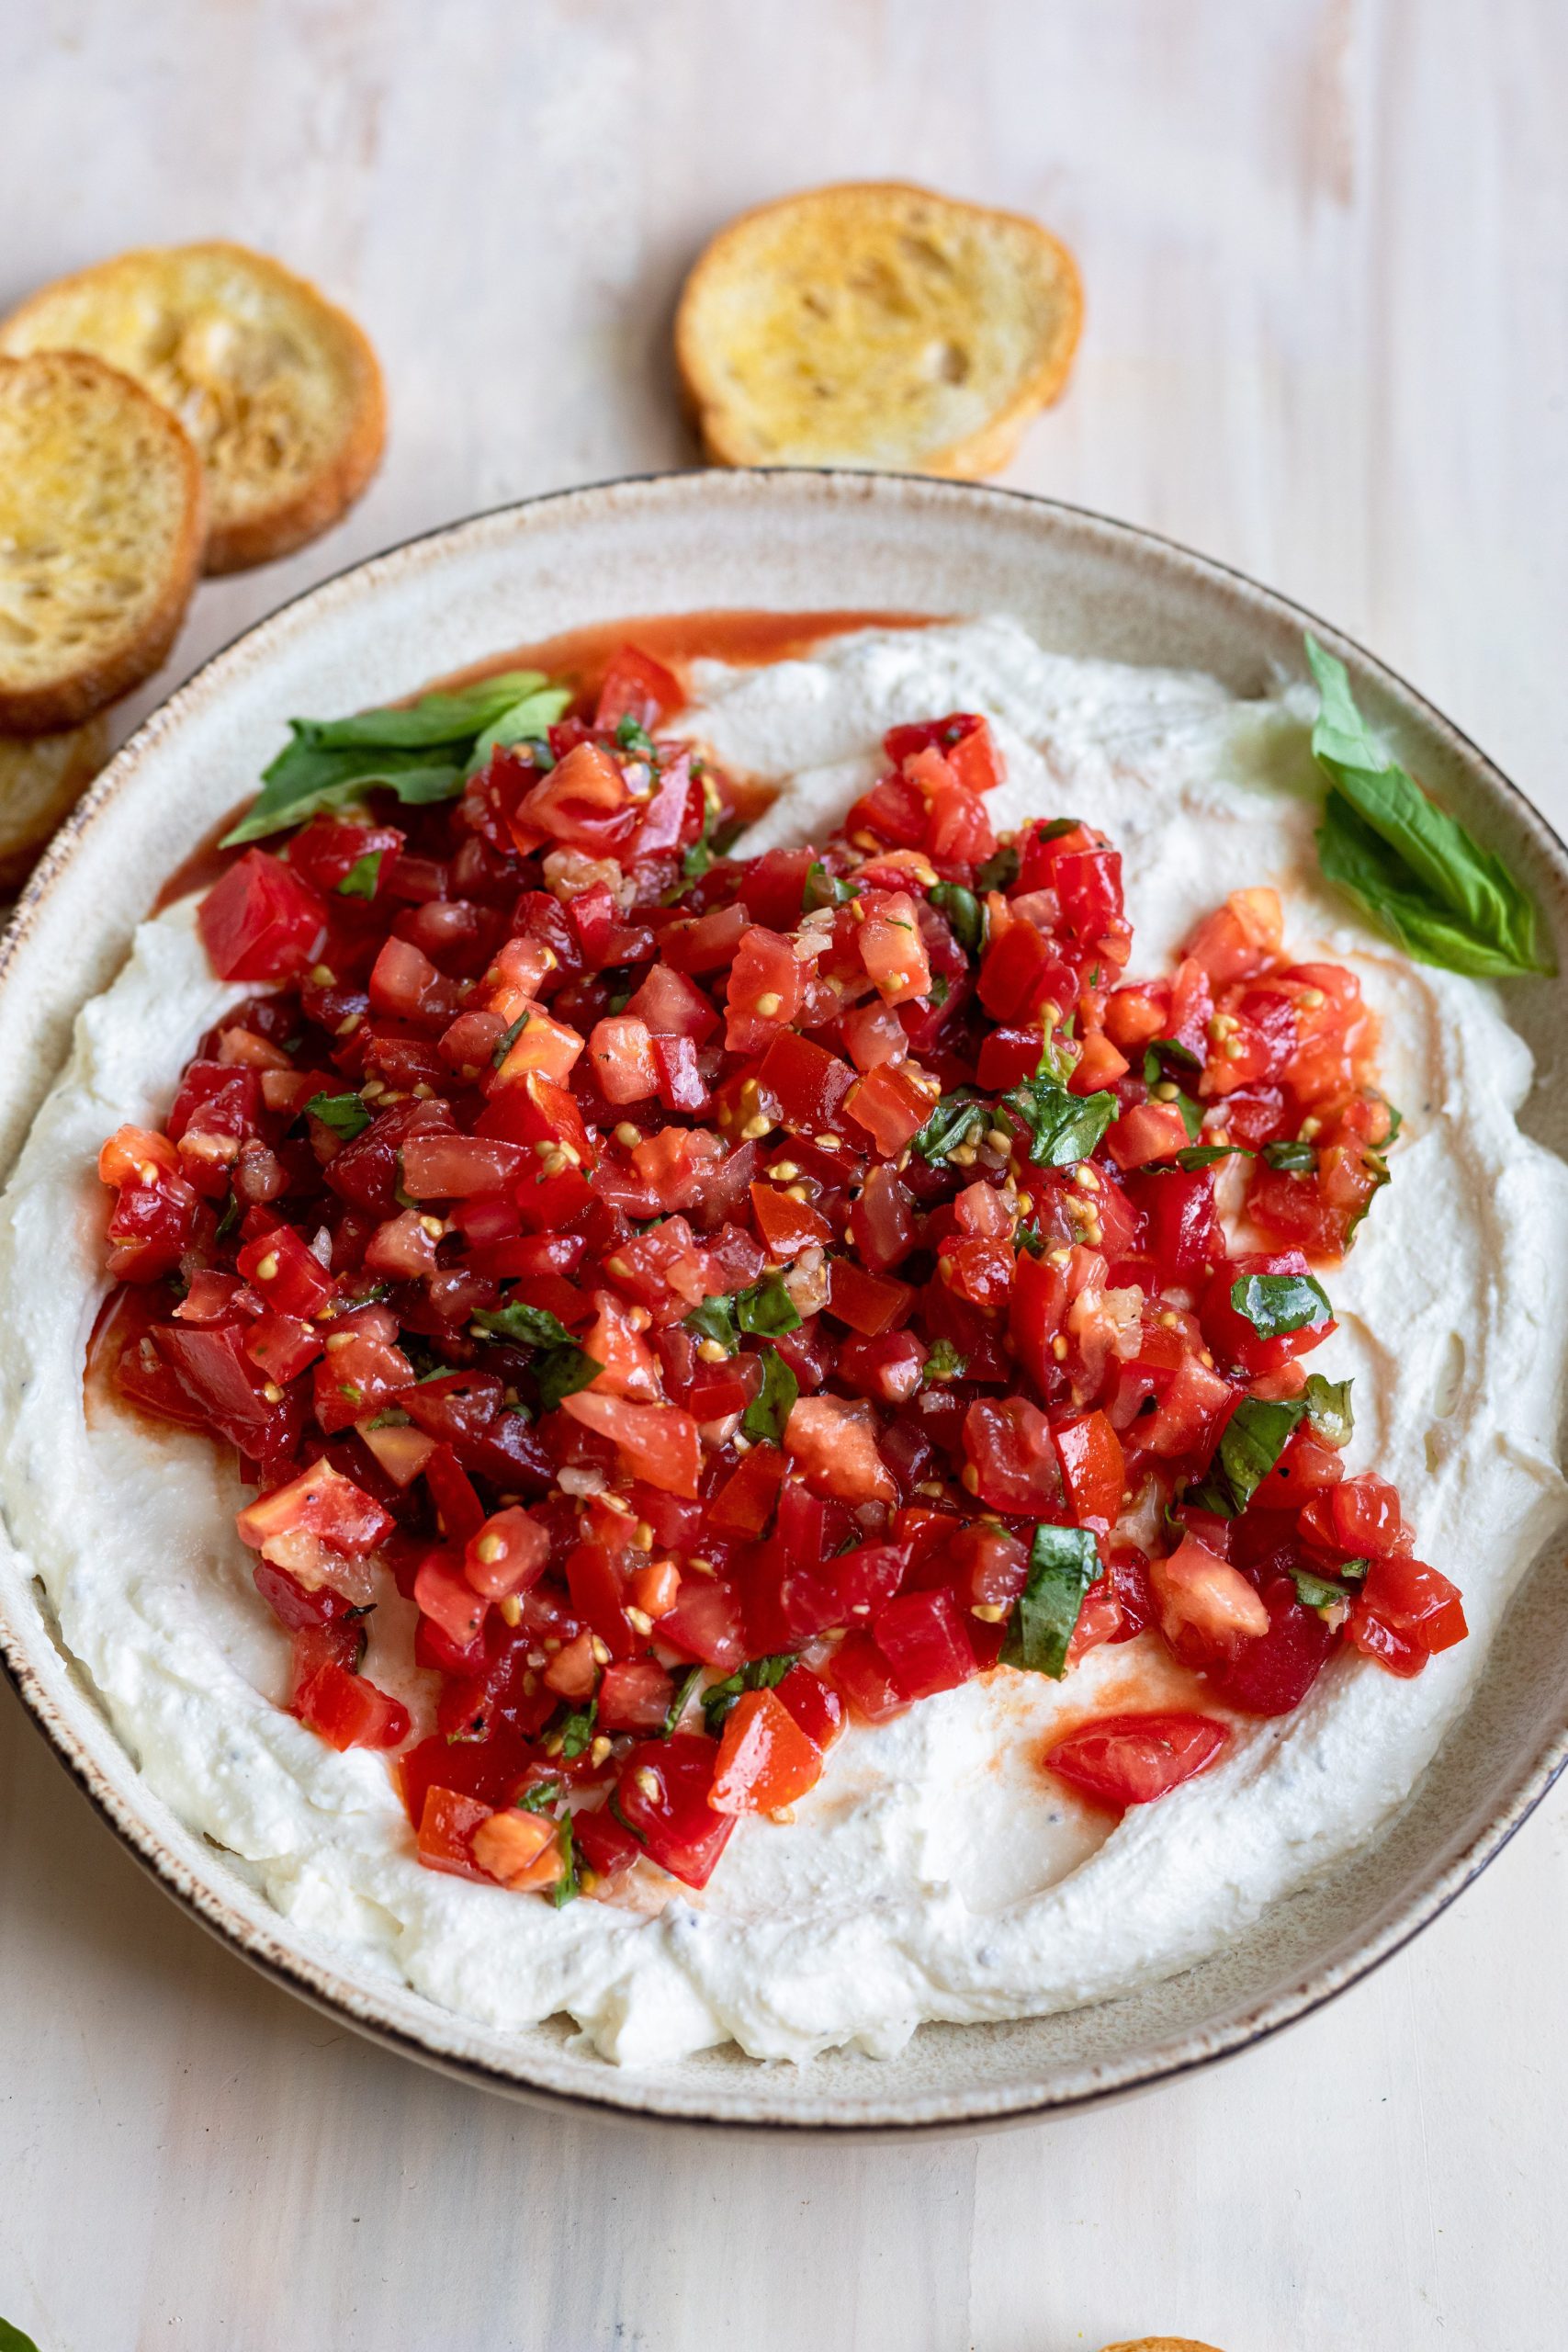 Whipped ricotta bruschetta dip with crostini on a light wood background.